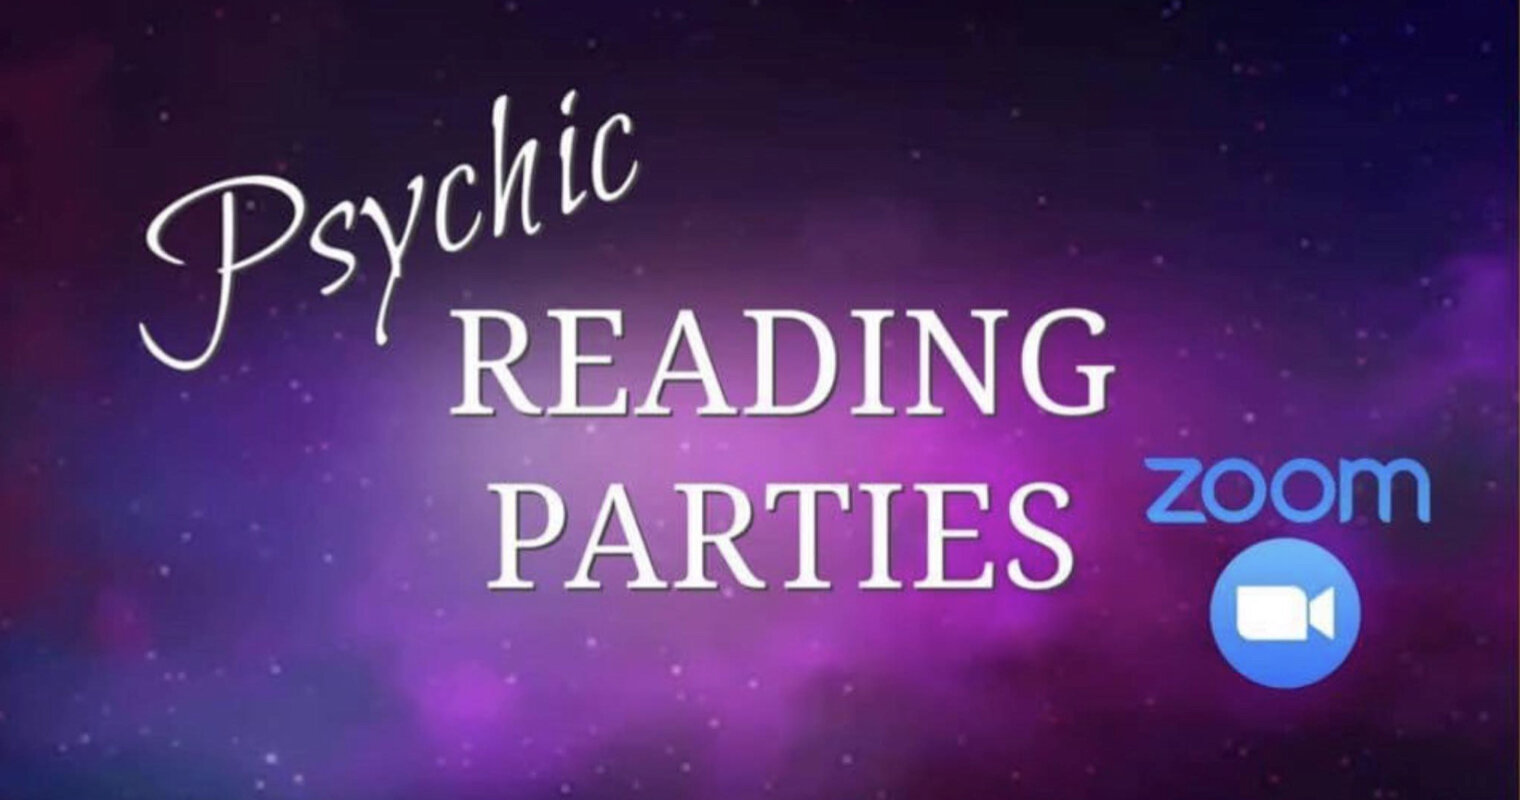 Psychic Reading Parties on Zoom (Copy)